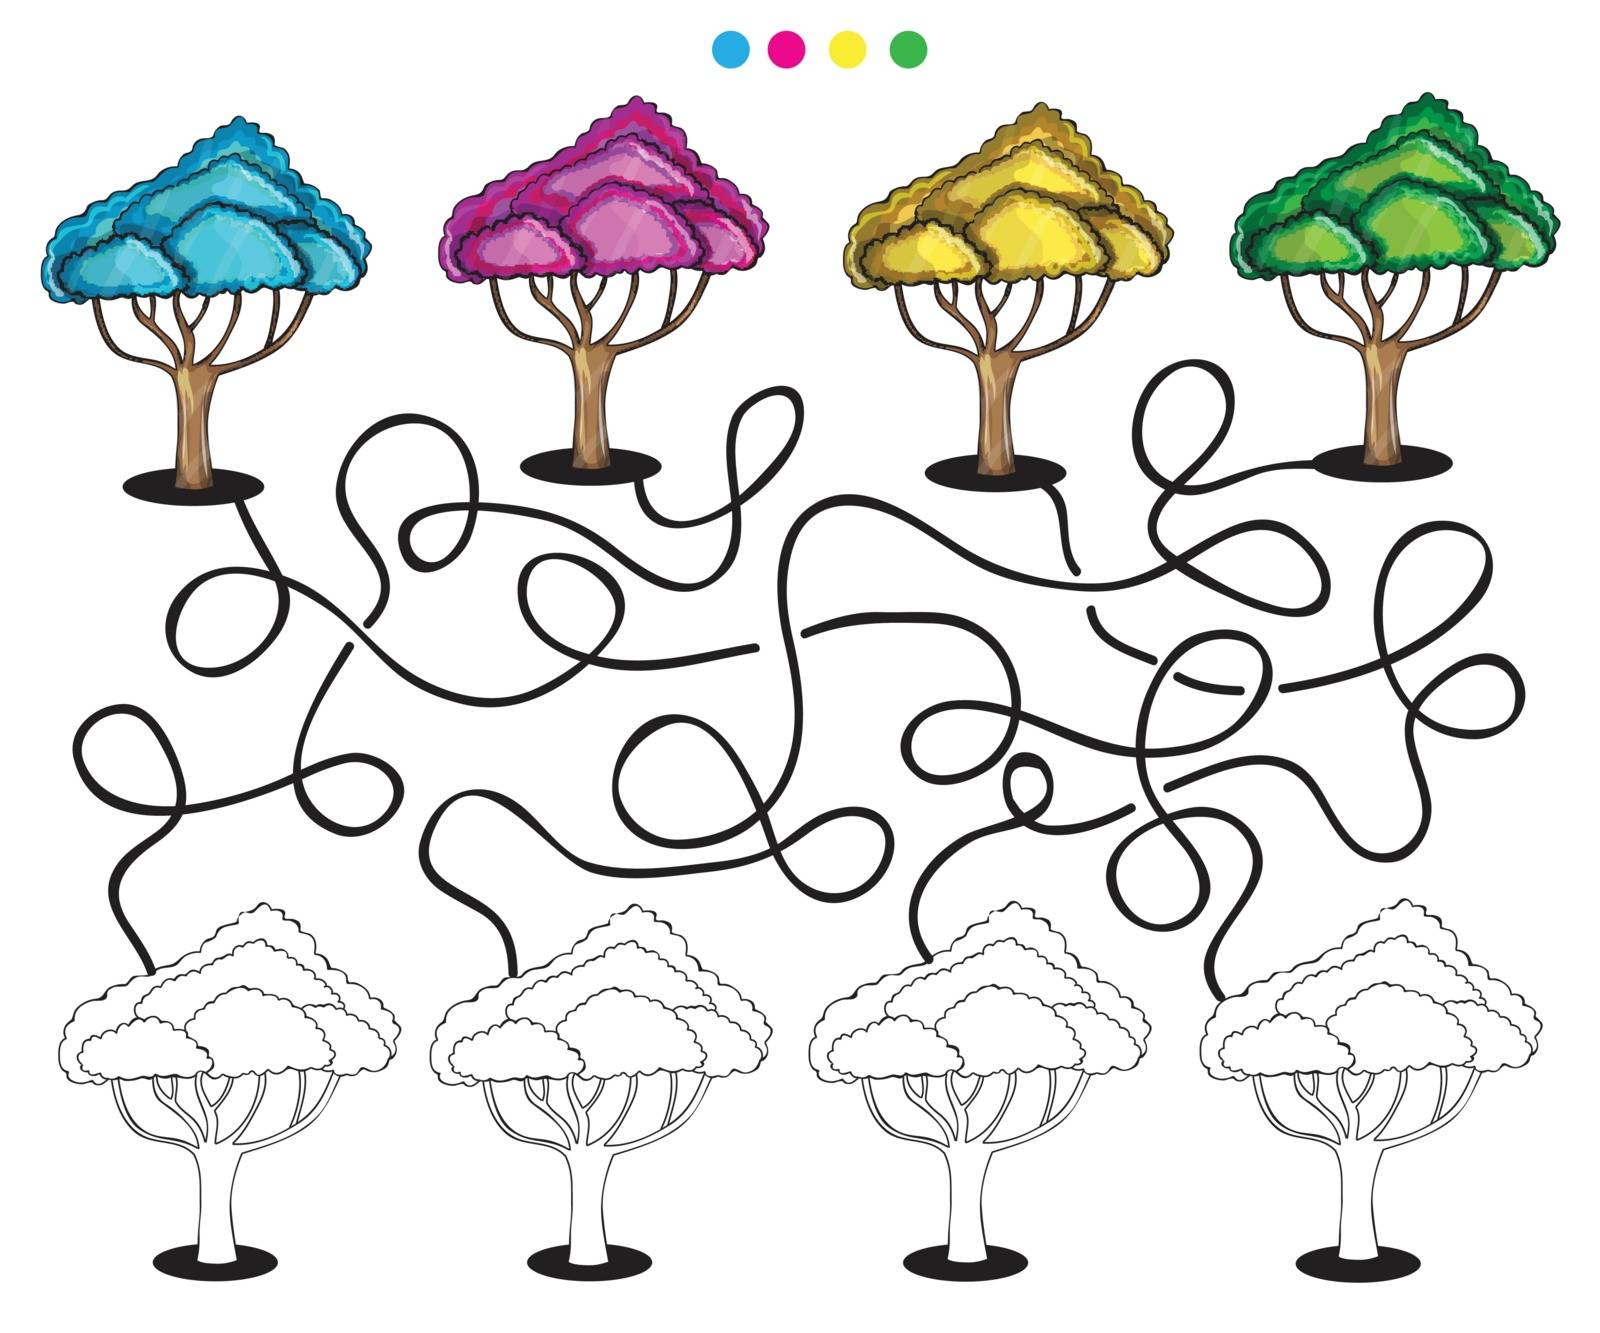 Visual puzzle and coloring page by natali_brill